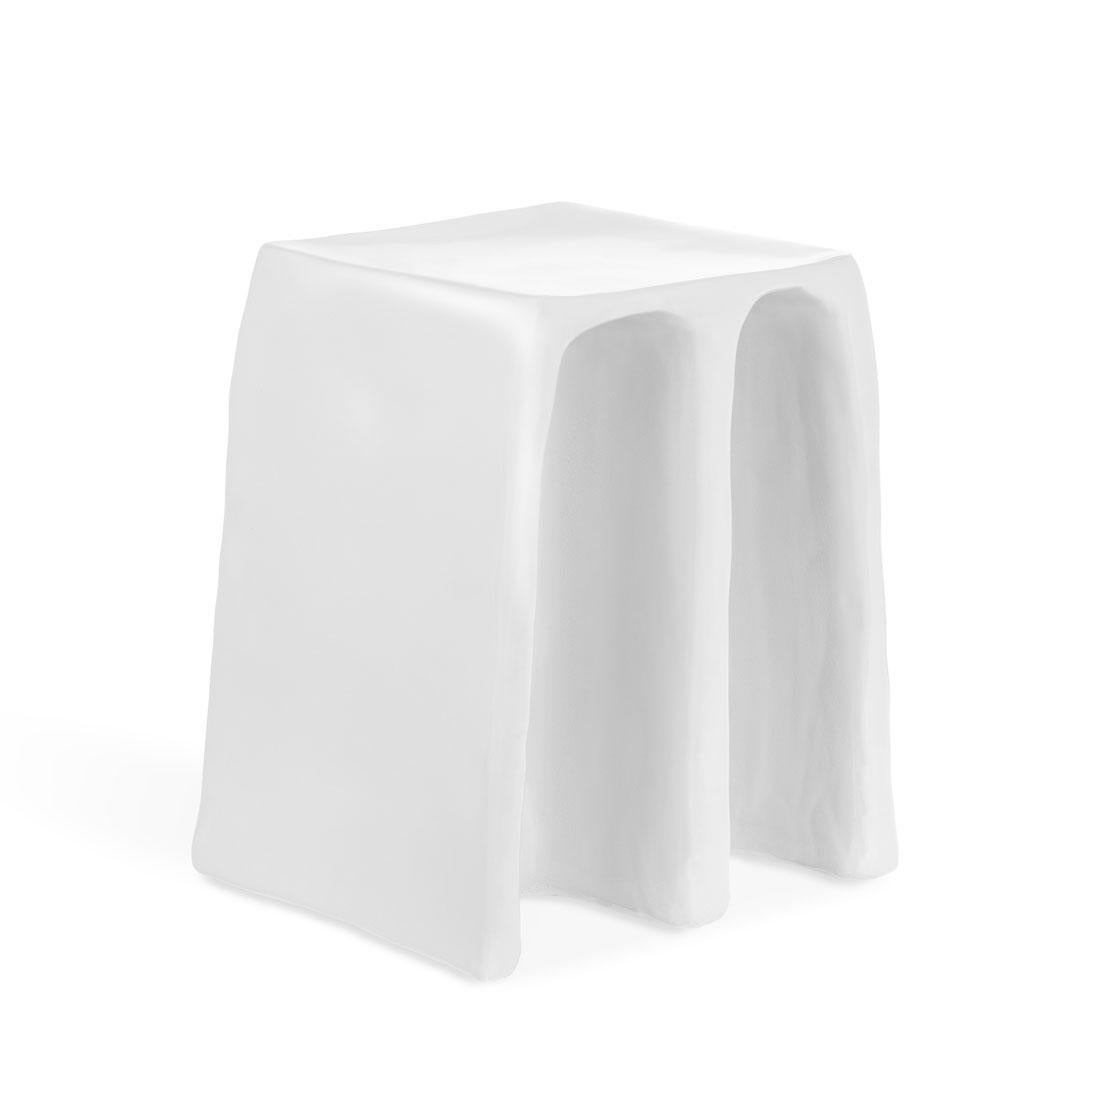 Chouchou white stool by Pulpo
Dimensions: D 35 x W 30 x H 43 cm
Materials: ceramic

Also available in different colours.

Whether stool or storage table, piece of column or inspired by the wrinkled folds of a curtain: in any case, chouchou is